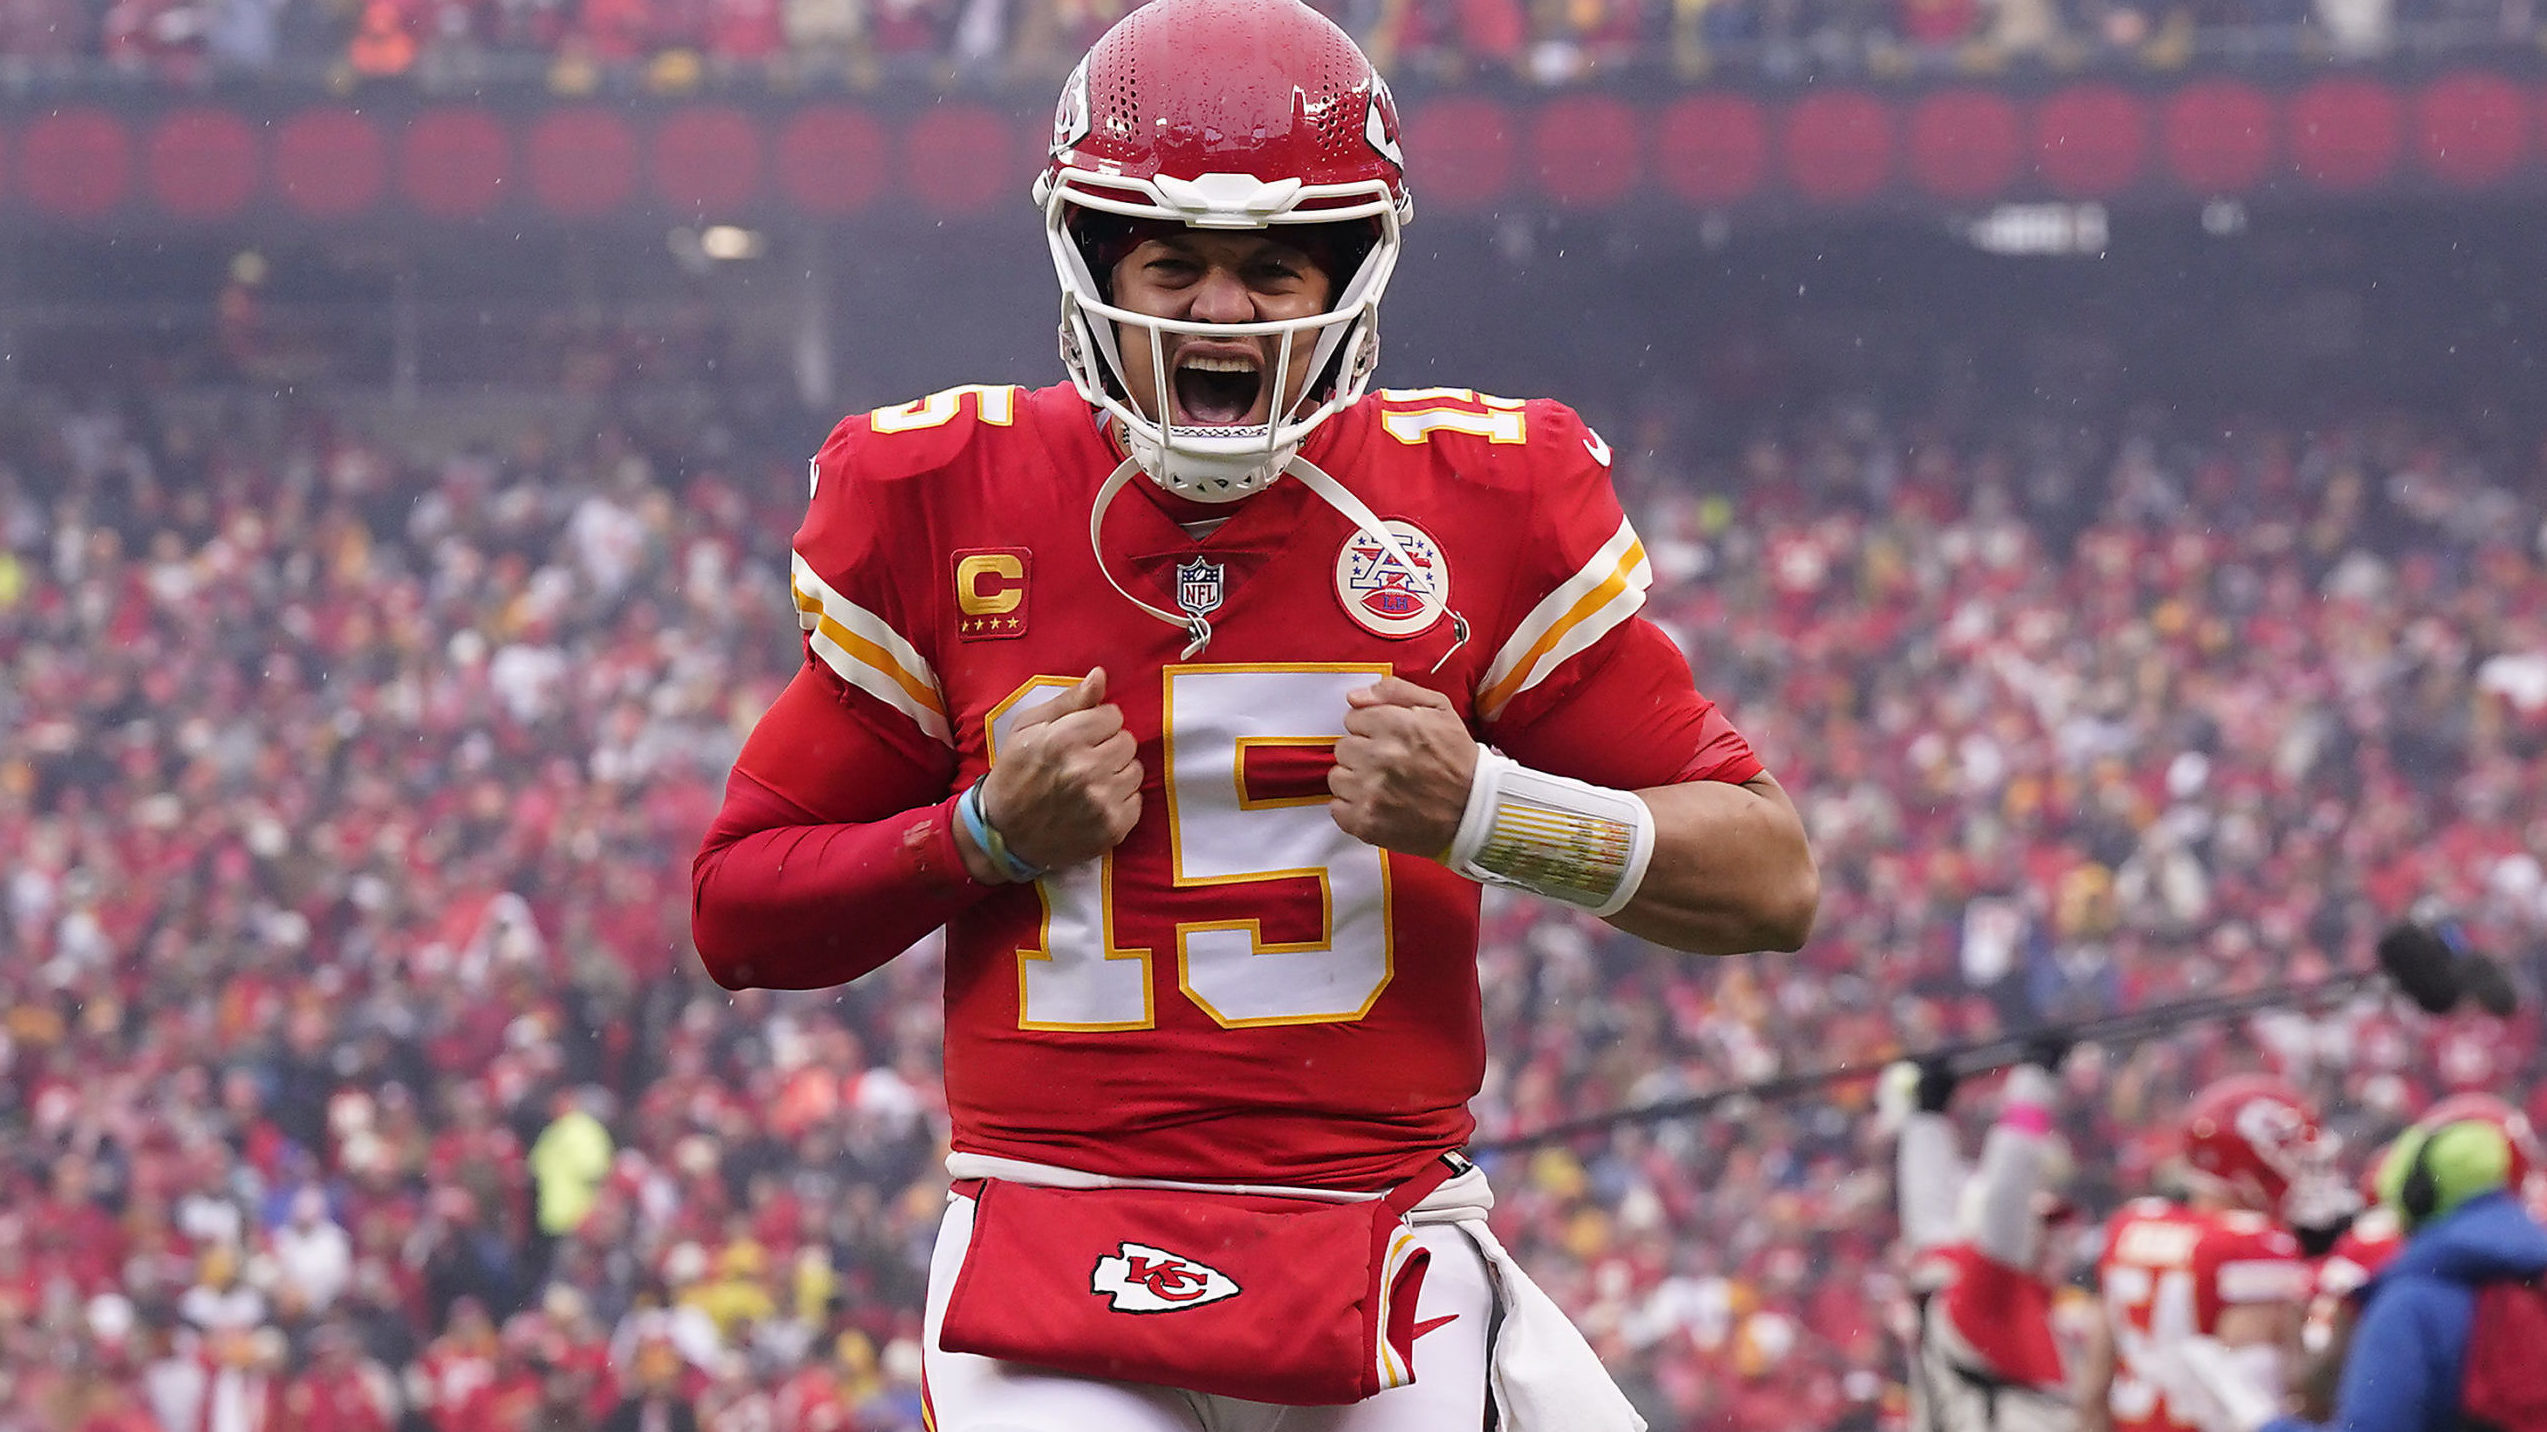 Mahomes’ Generational Talent Gives Chiefs Edge in Super Bowl